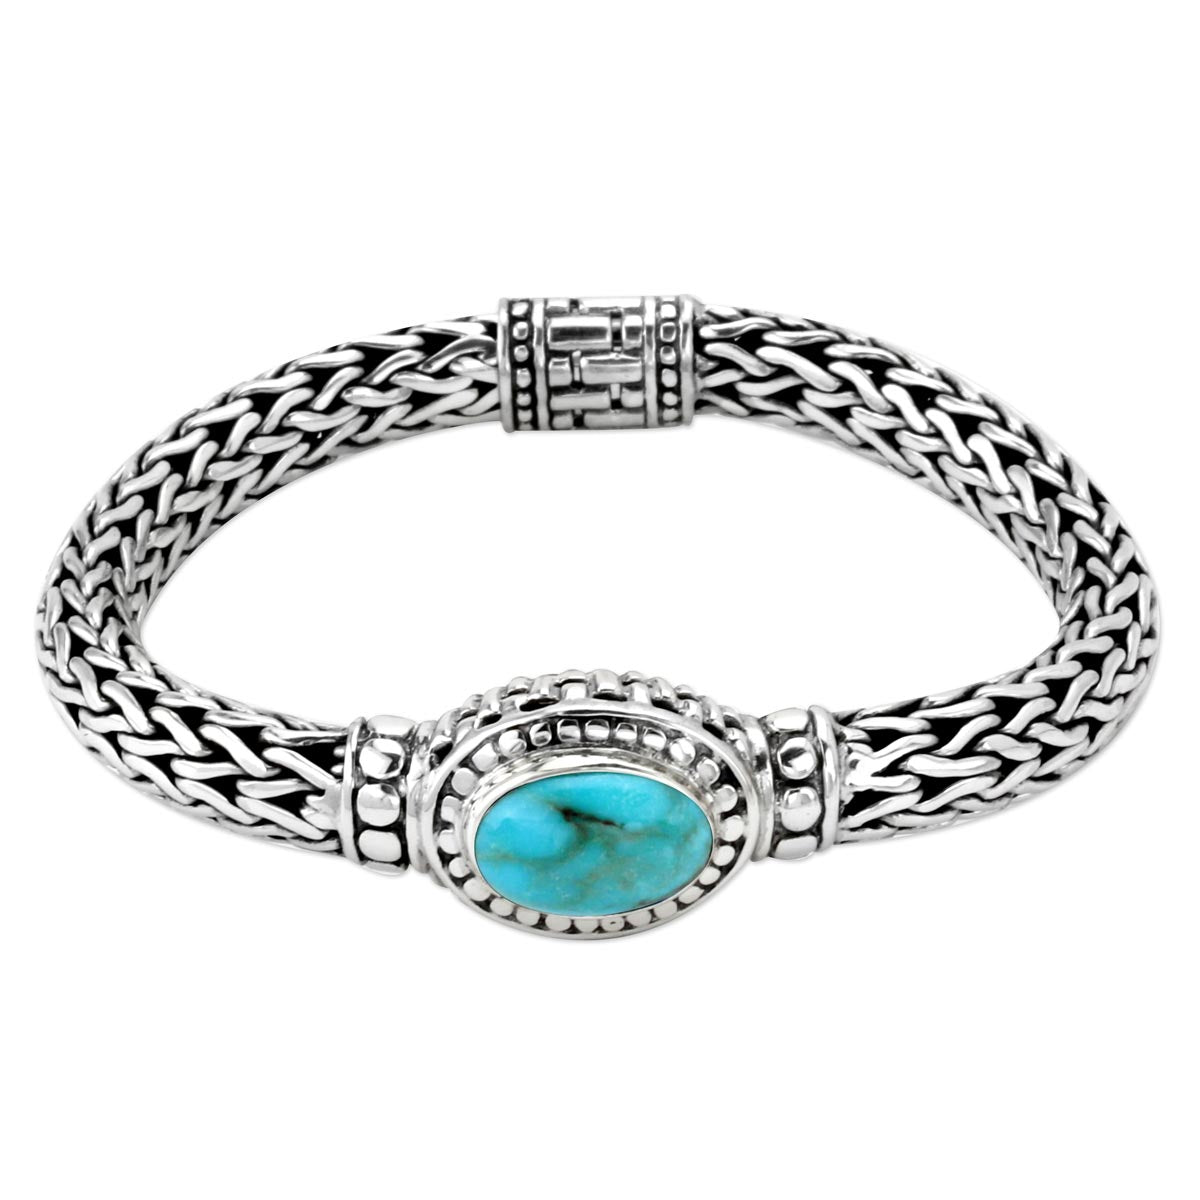 Bali Sterling Silver and Turquoise Bracelet-342775